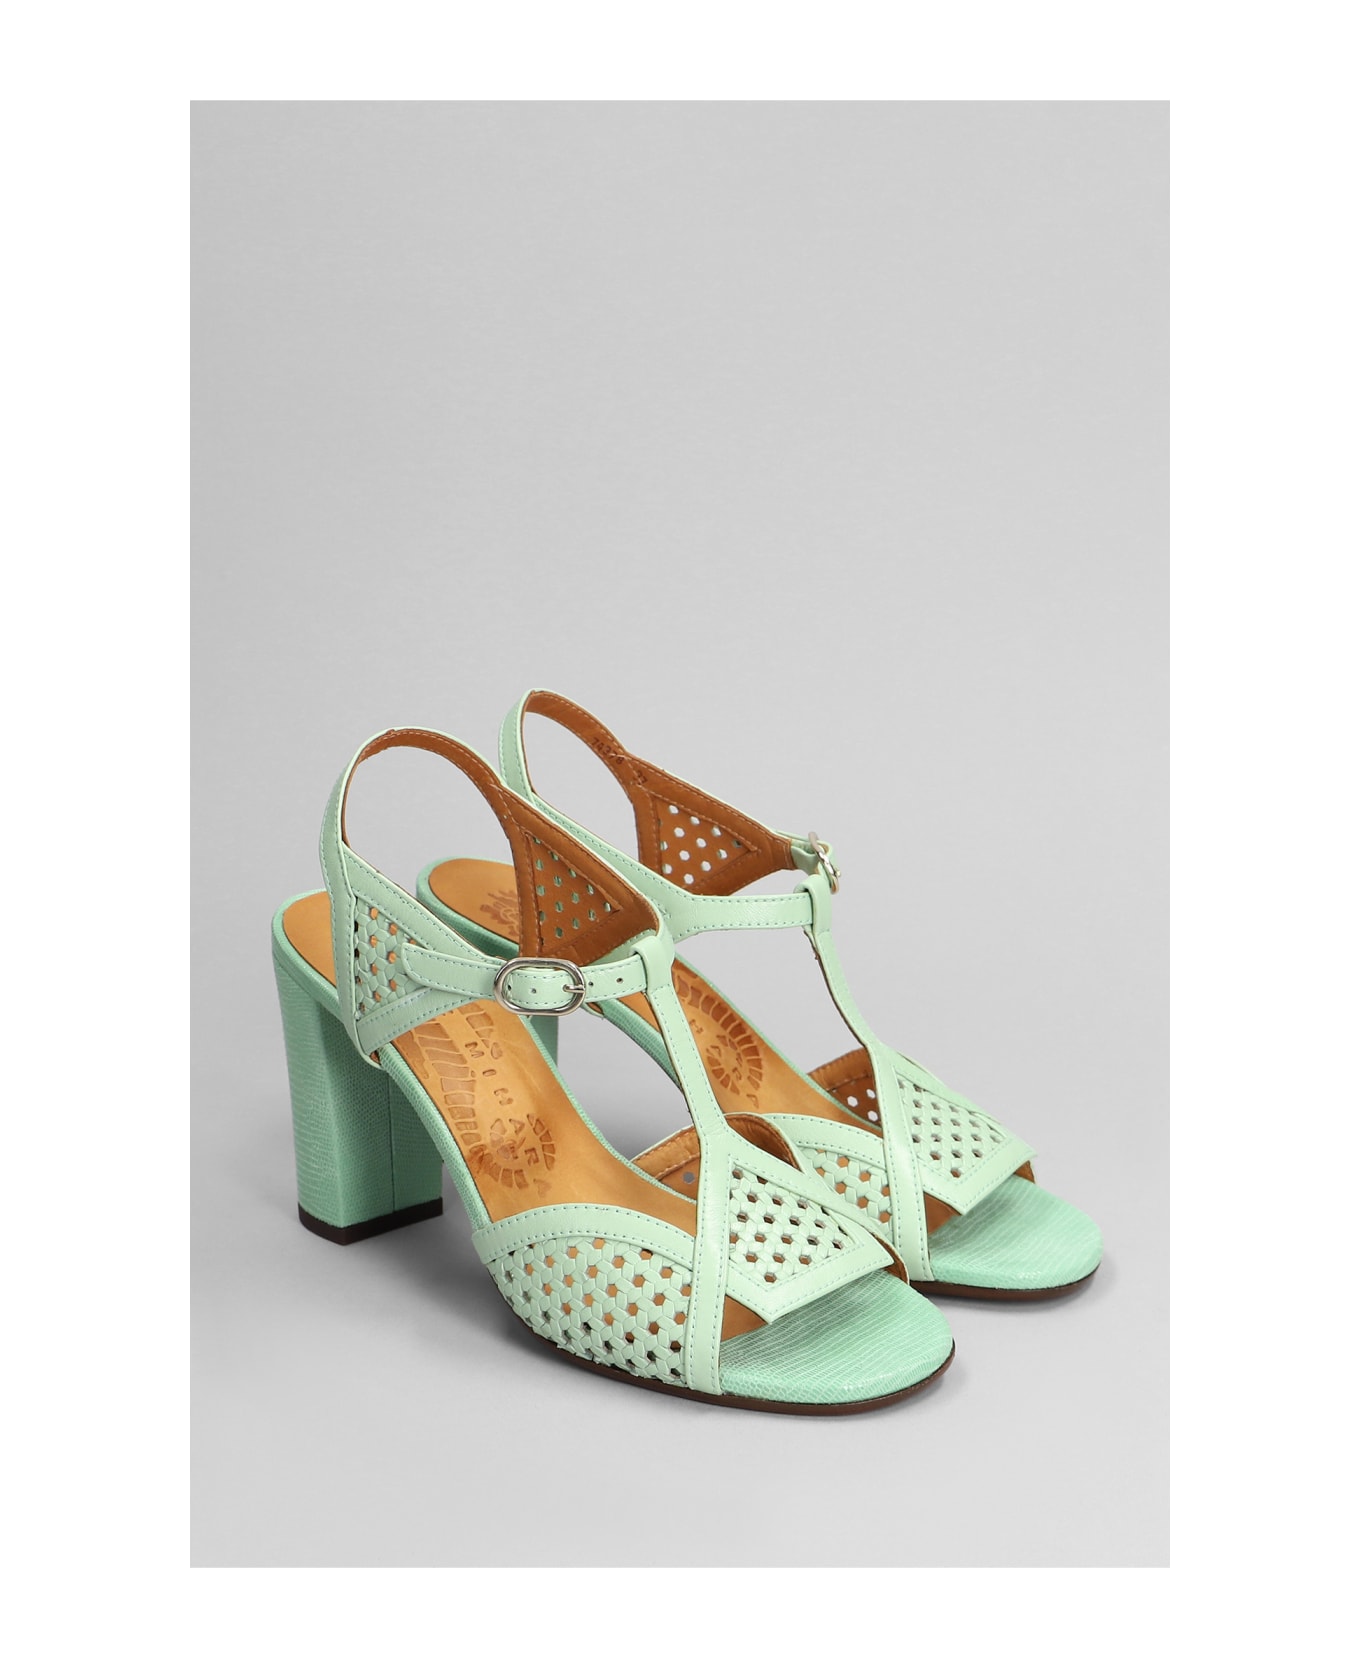 Chie Mihara Bessy Sandals In Green Leather - green サンダル